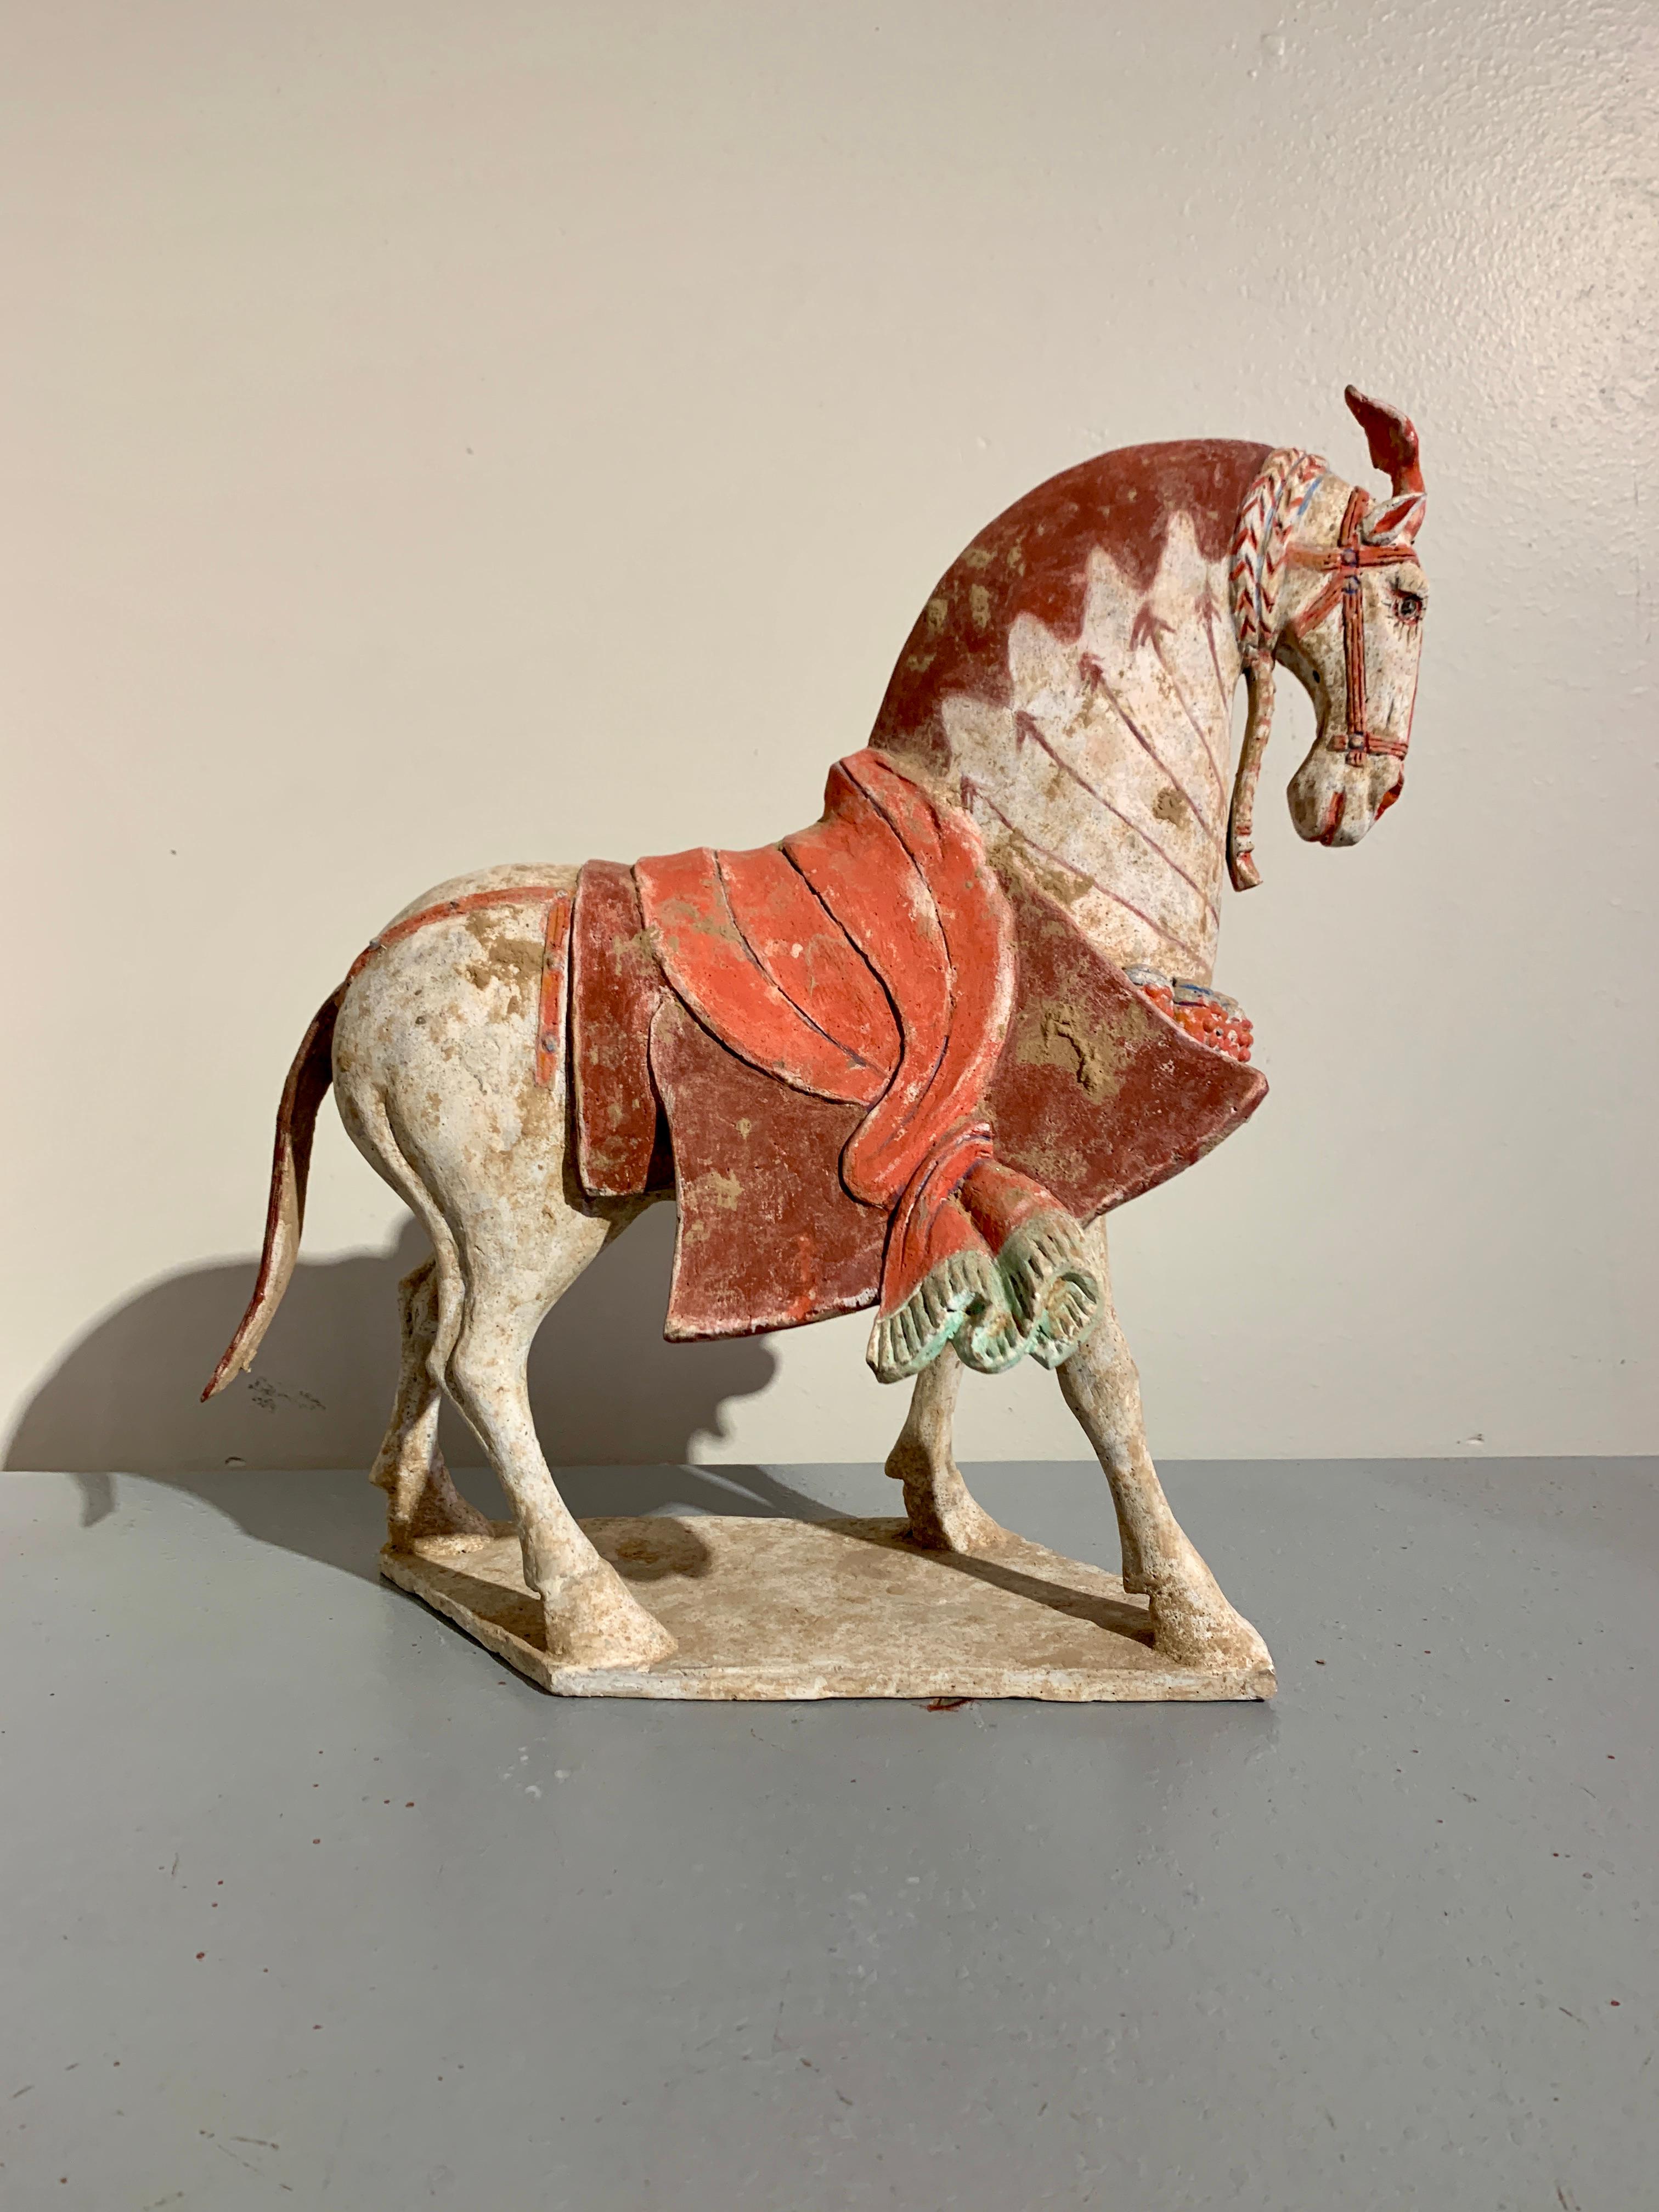 A magnificent Chinese painted pottery model of a striding caparisoned horse, Northern Qi Dynasty (550 to 577 AD), China, TL tested by Oxford Laboratories. 

The noble steed is portrayed mid-stride upon a trapezoidal base, legs extended at a